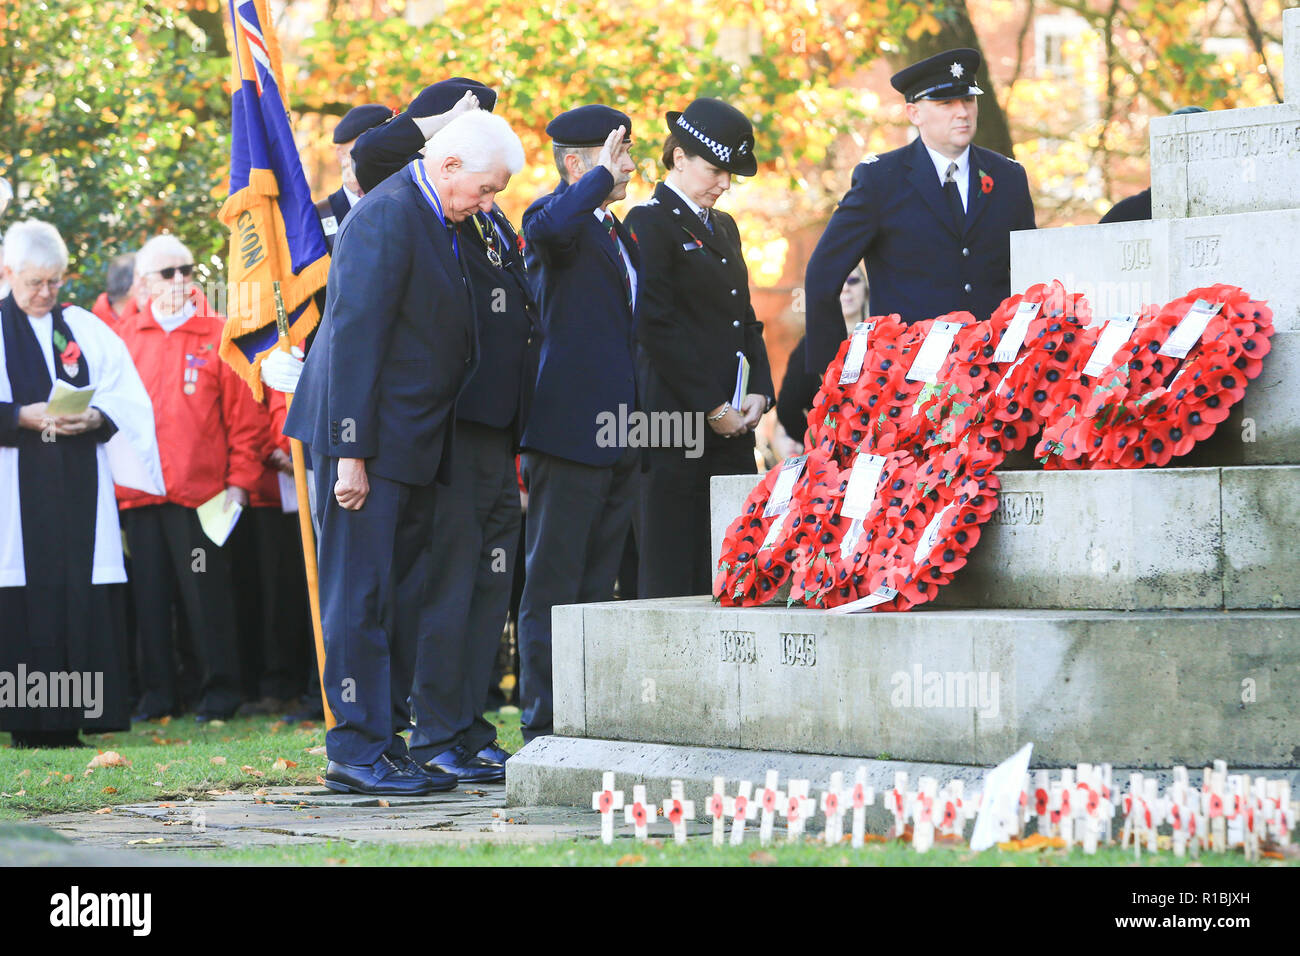 Worcester, UK. 11th November, 2018. The end of the First World War is commemorated at Worcester Cathedral. Peter Lopeman/Alamy Live News Stock Photo